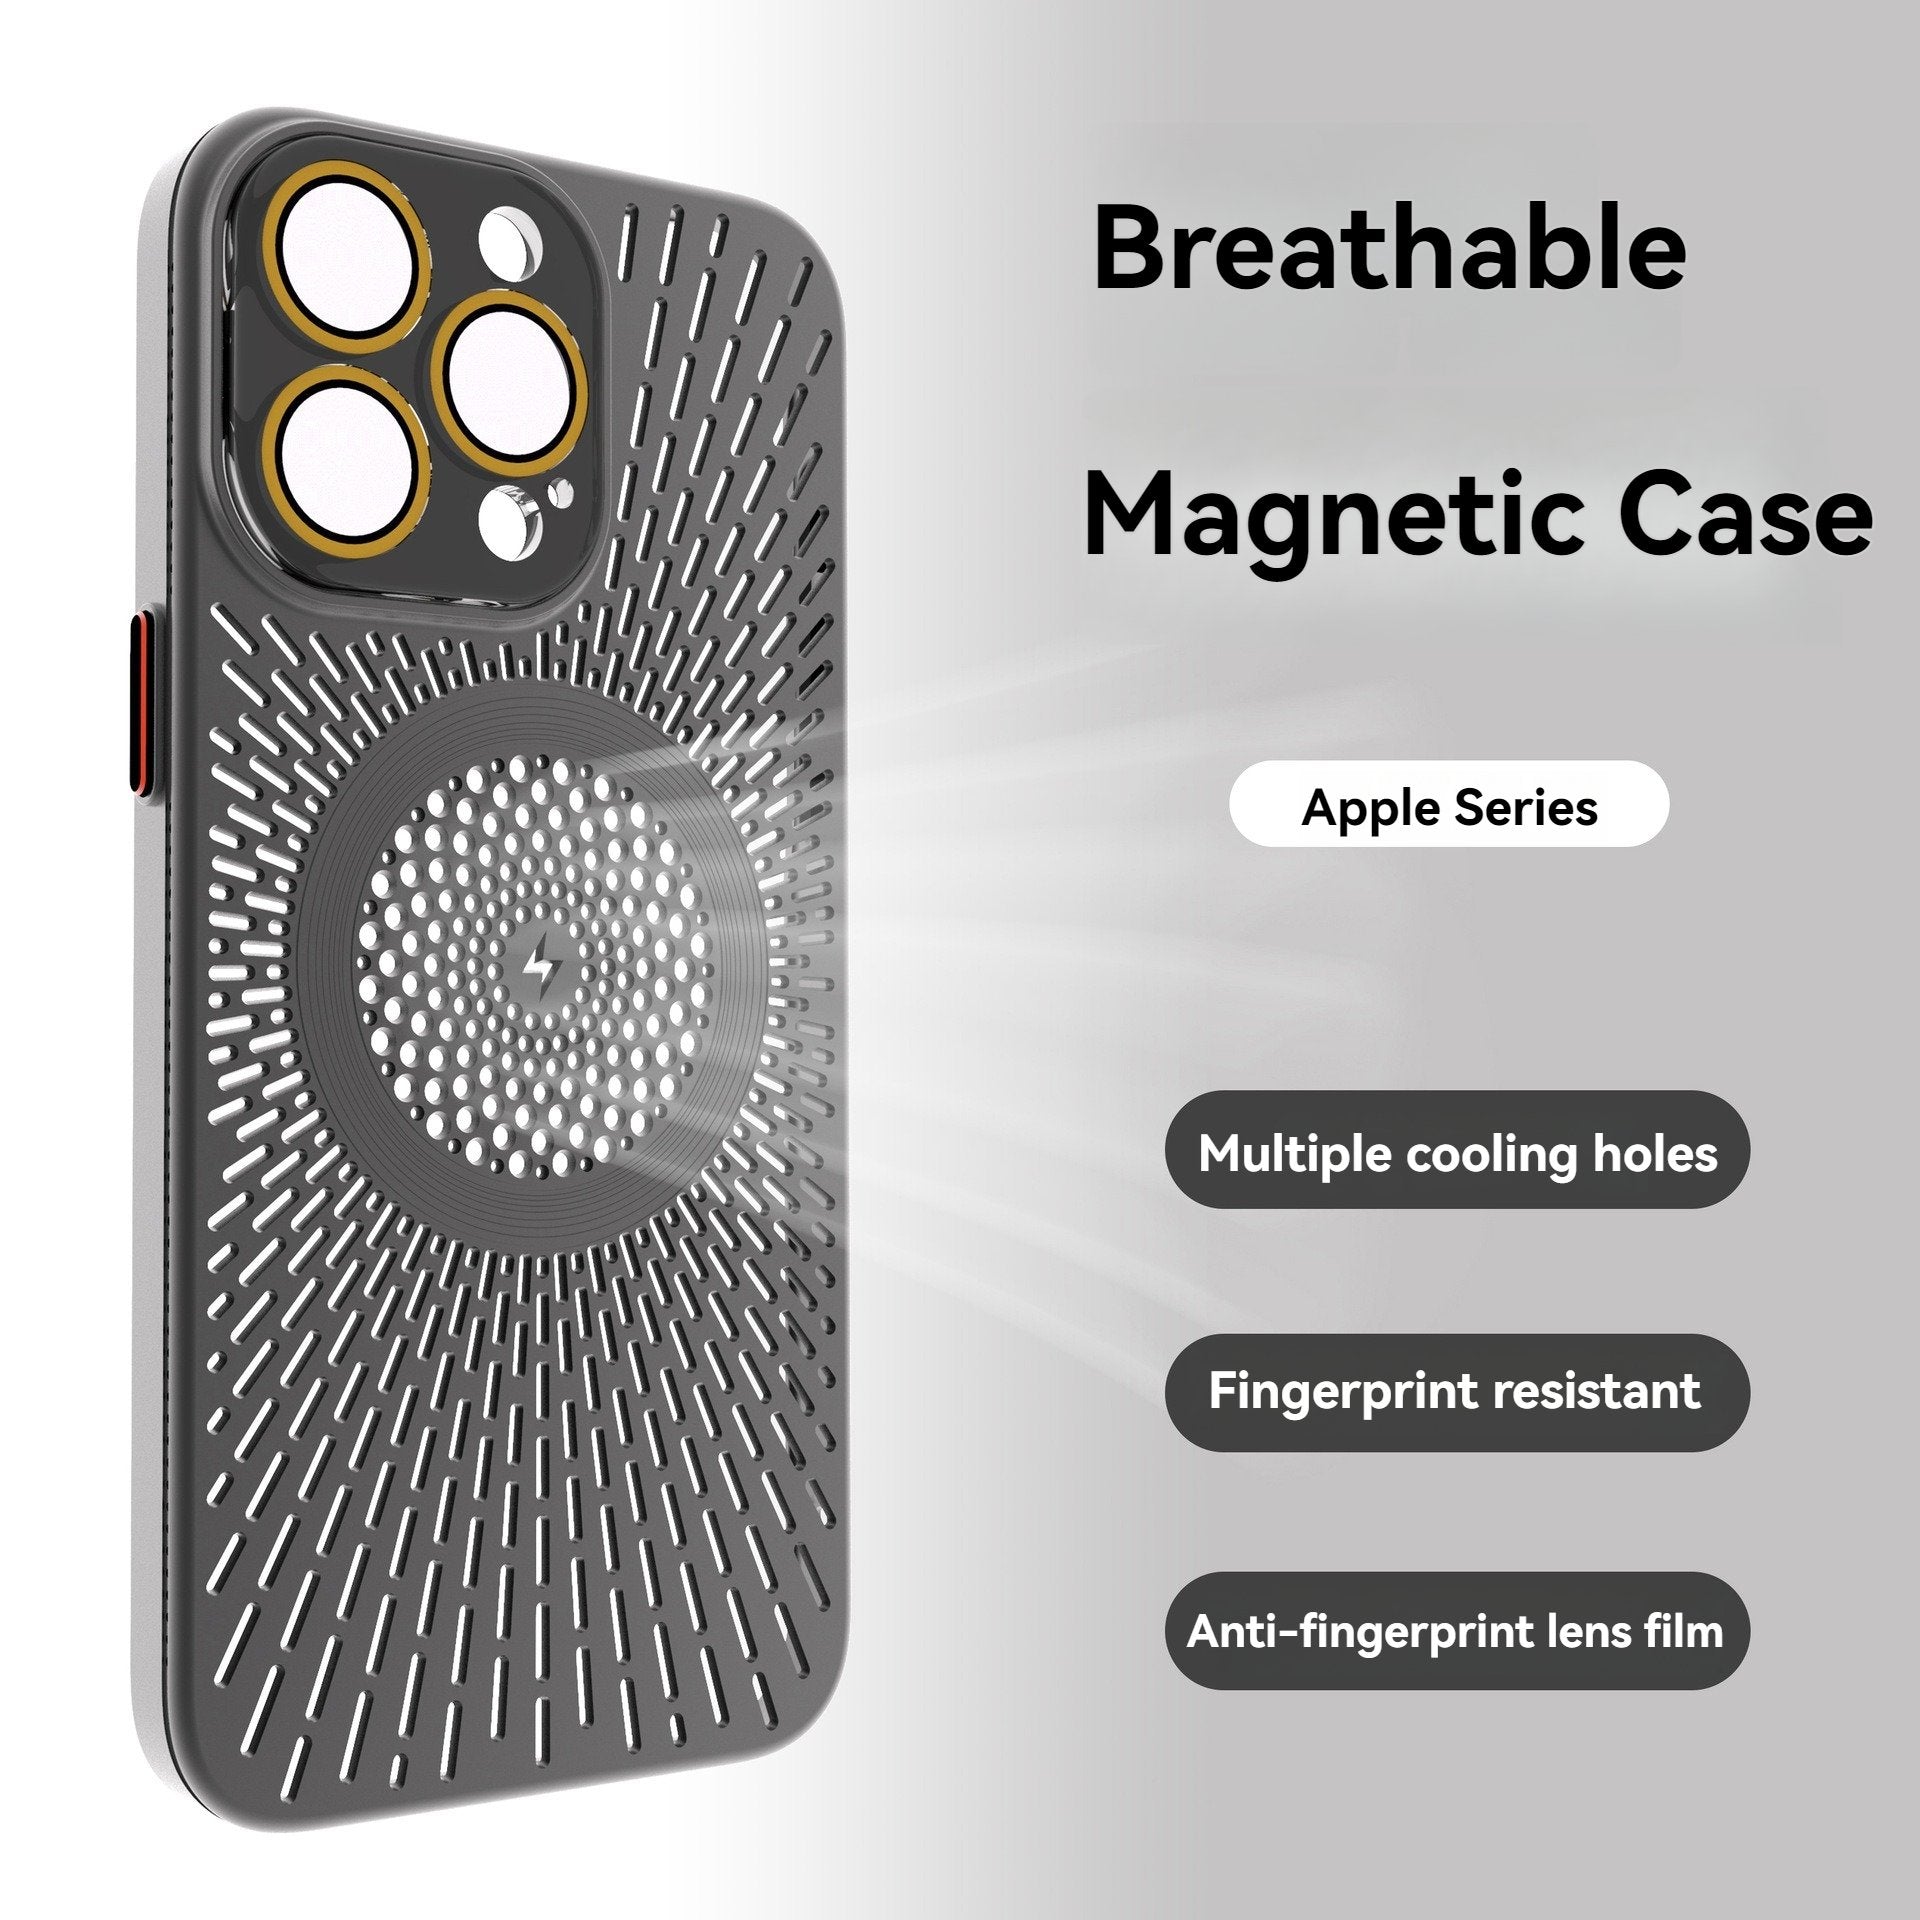 Breathable Heat Dissipation Mesh Case Magnetic Charging Skin Protective Case for iPhone - JekoMall